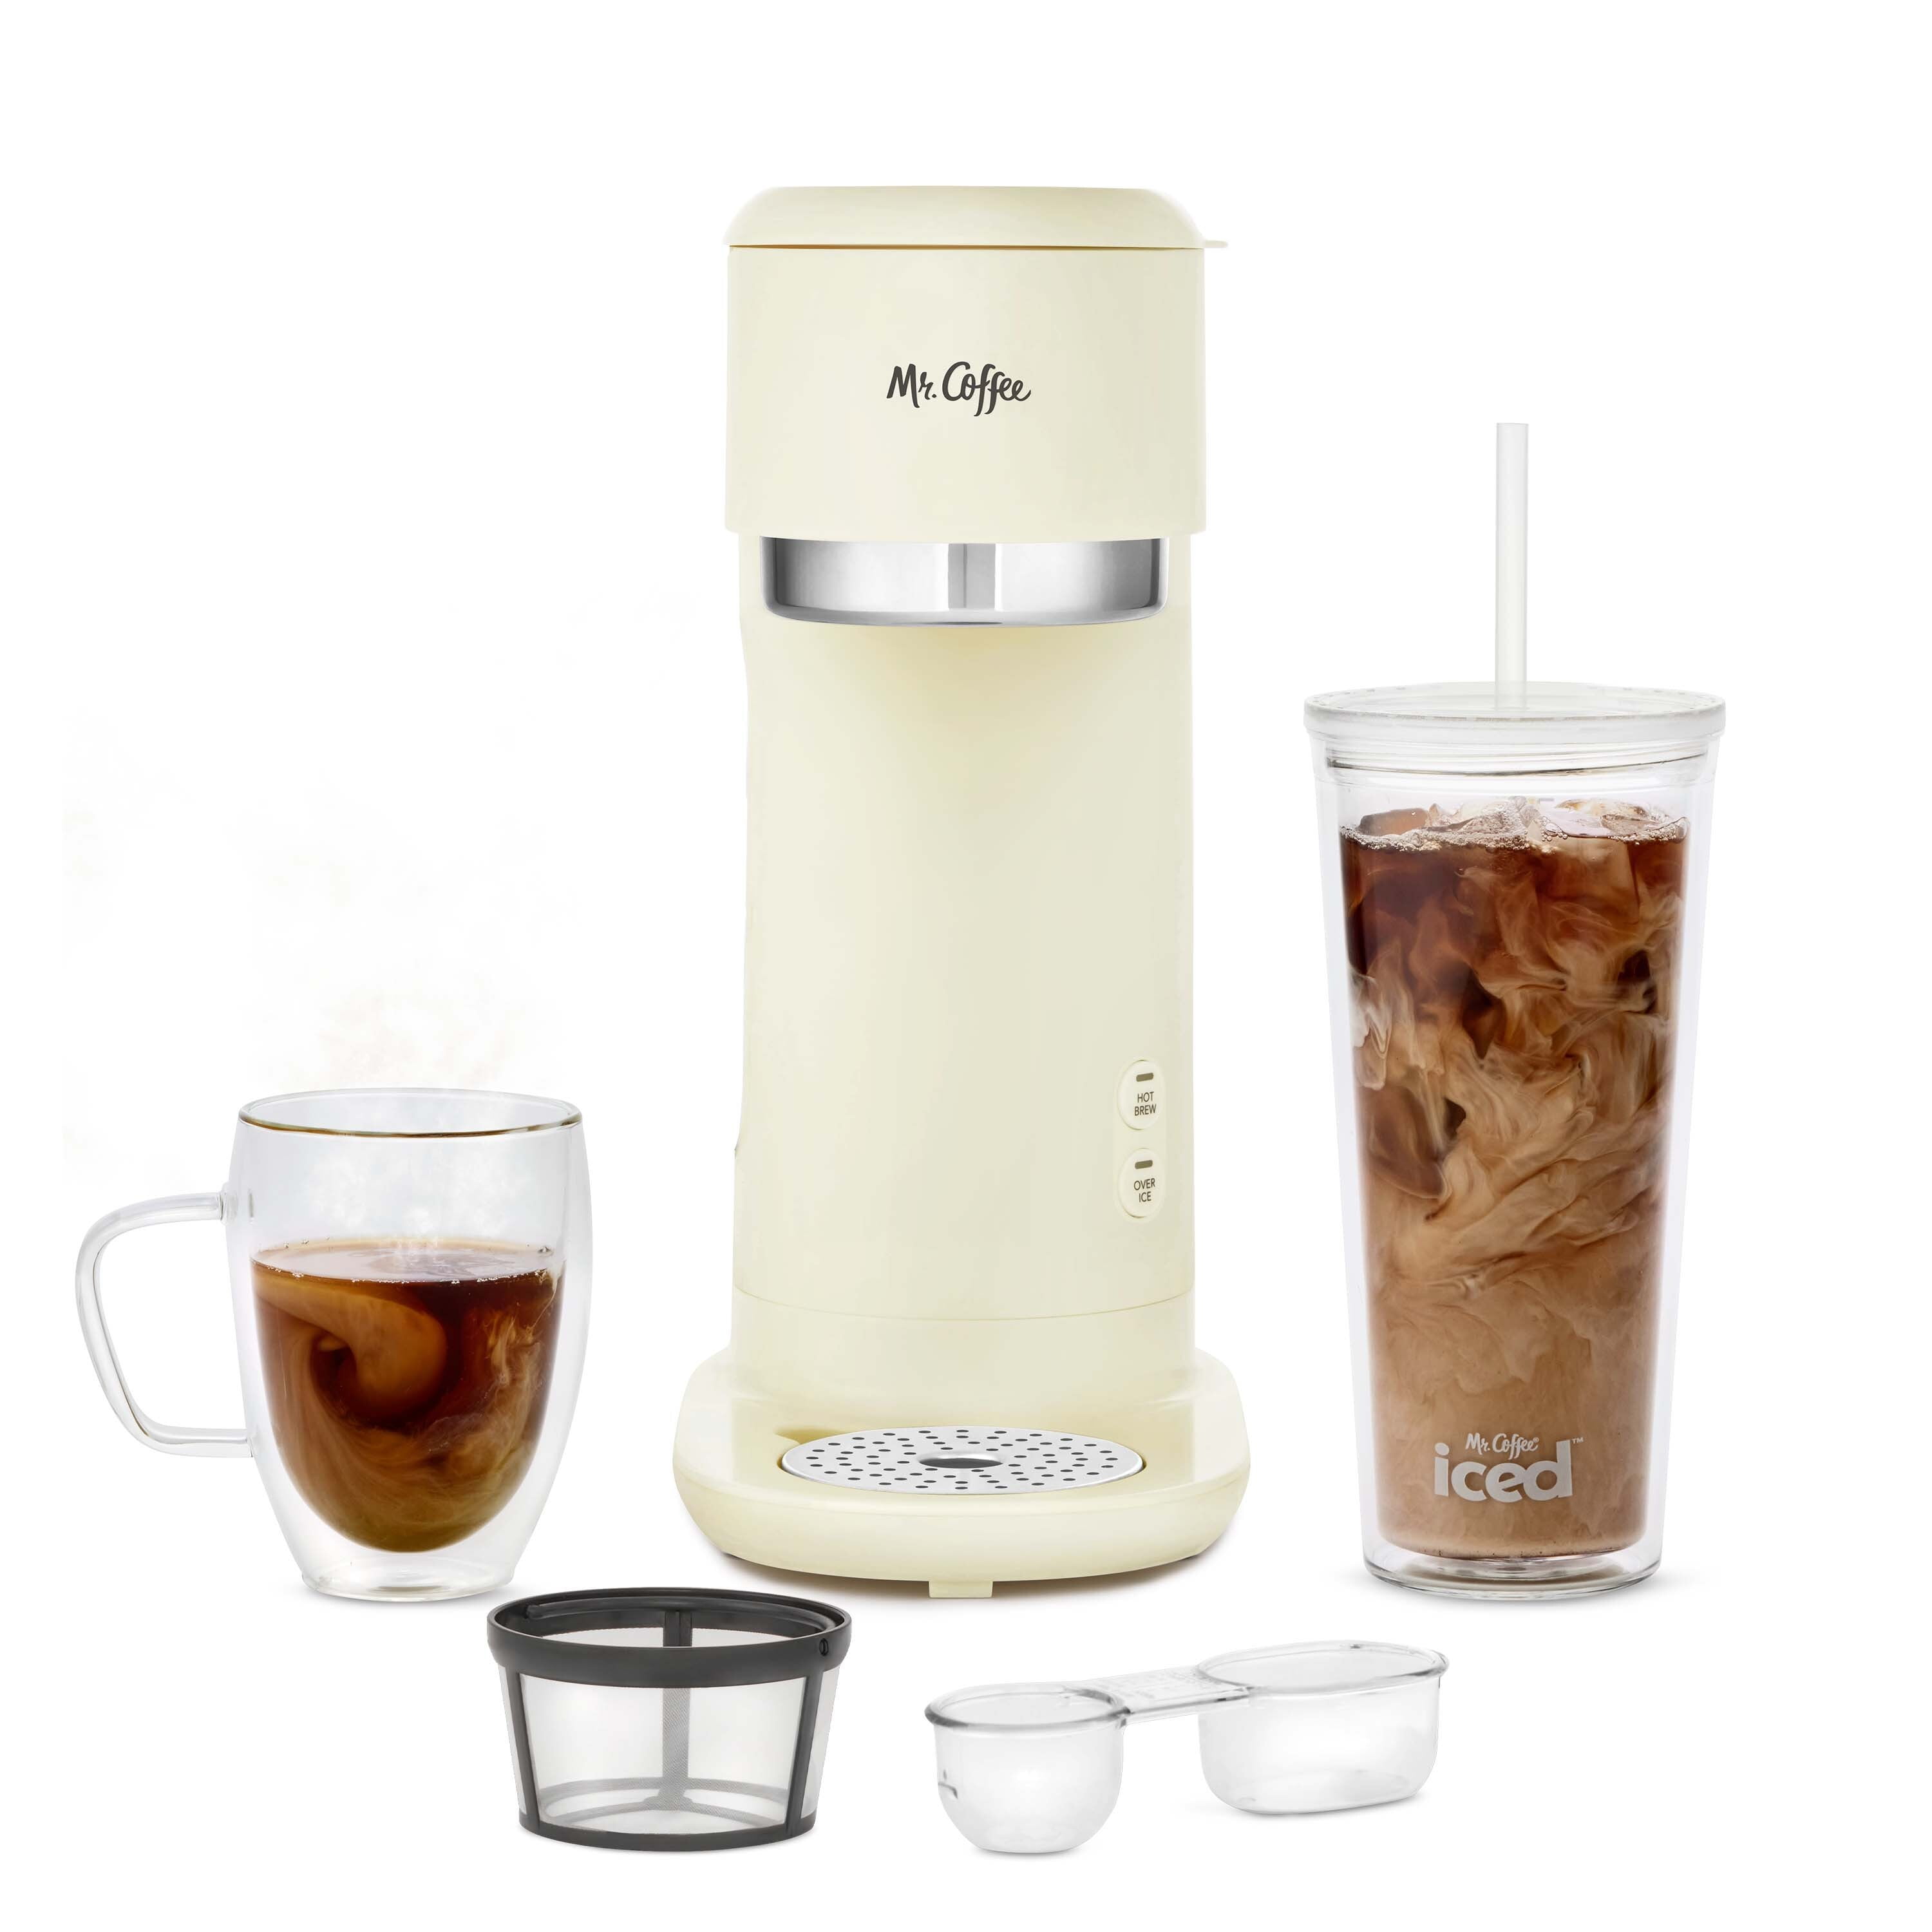 Mr. Coffee 4-in-1 Latte, Iced, and Hot Coffee Maker, Only $52.48